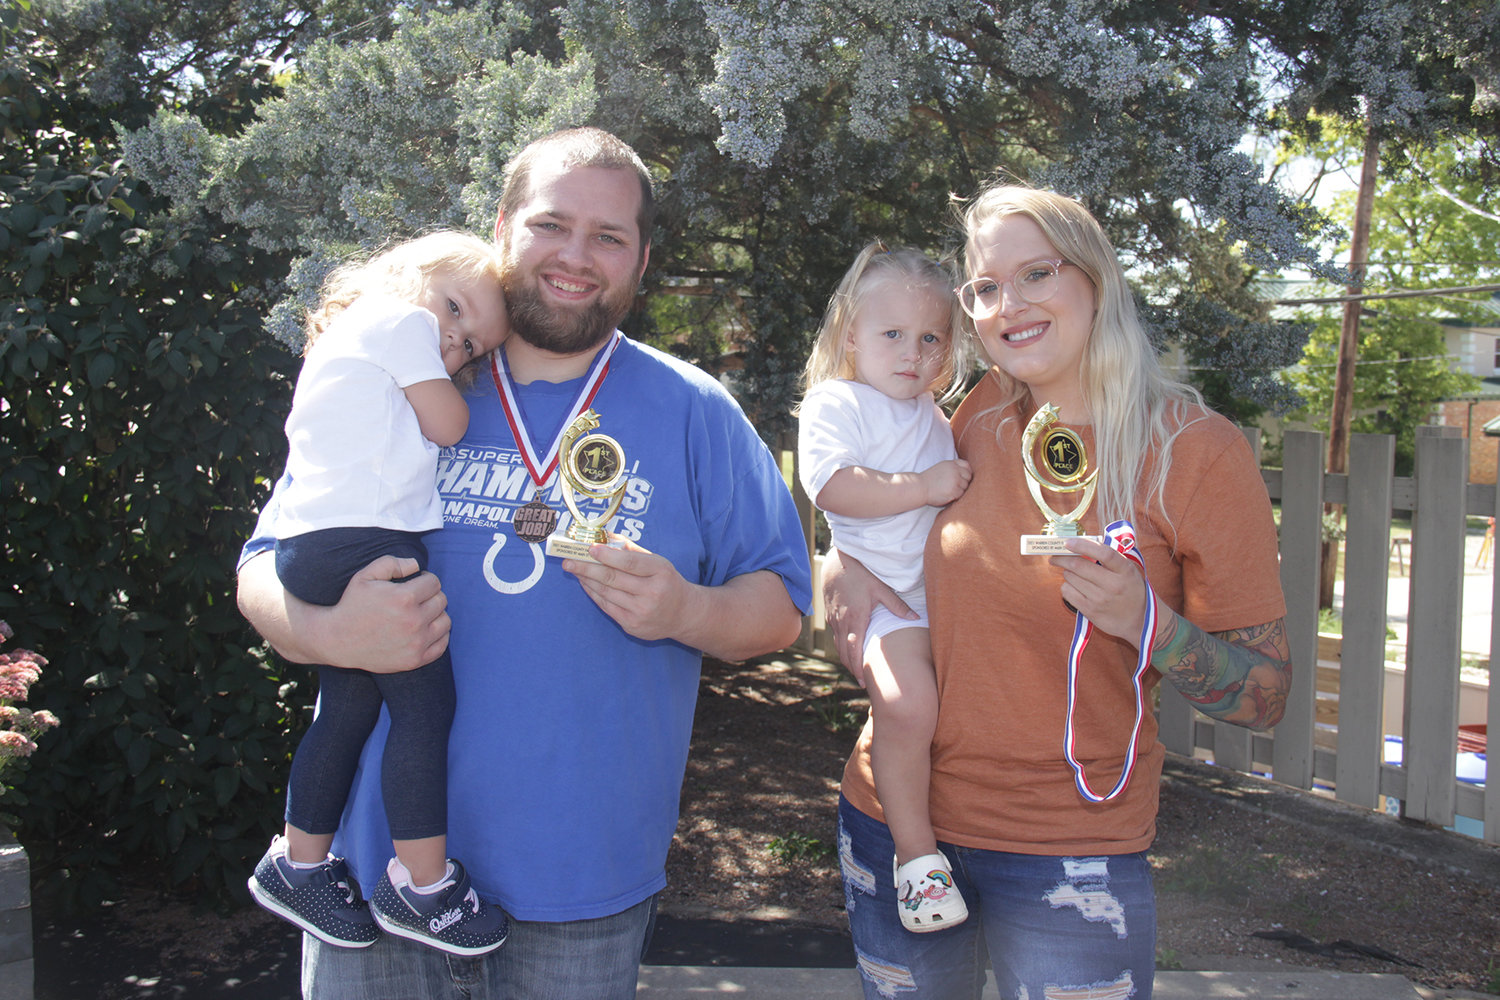 BABY CONTEST 25-30 MONTHS — Shared first place: Norah Adkins, held by Jake Adkins, and Kayzlee Haselhorst, held by Alexis Mills.